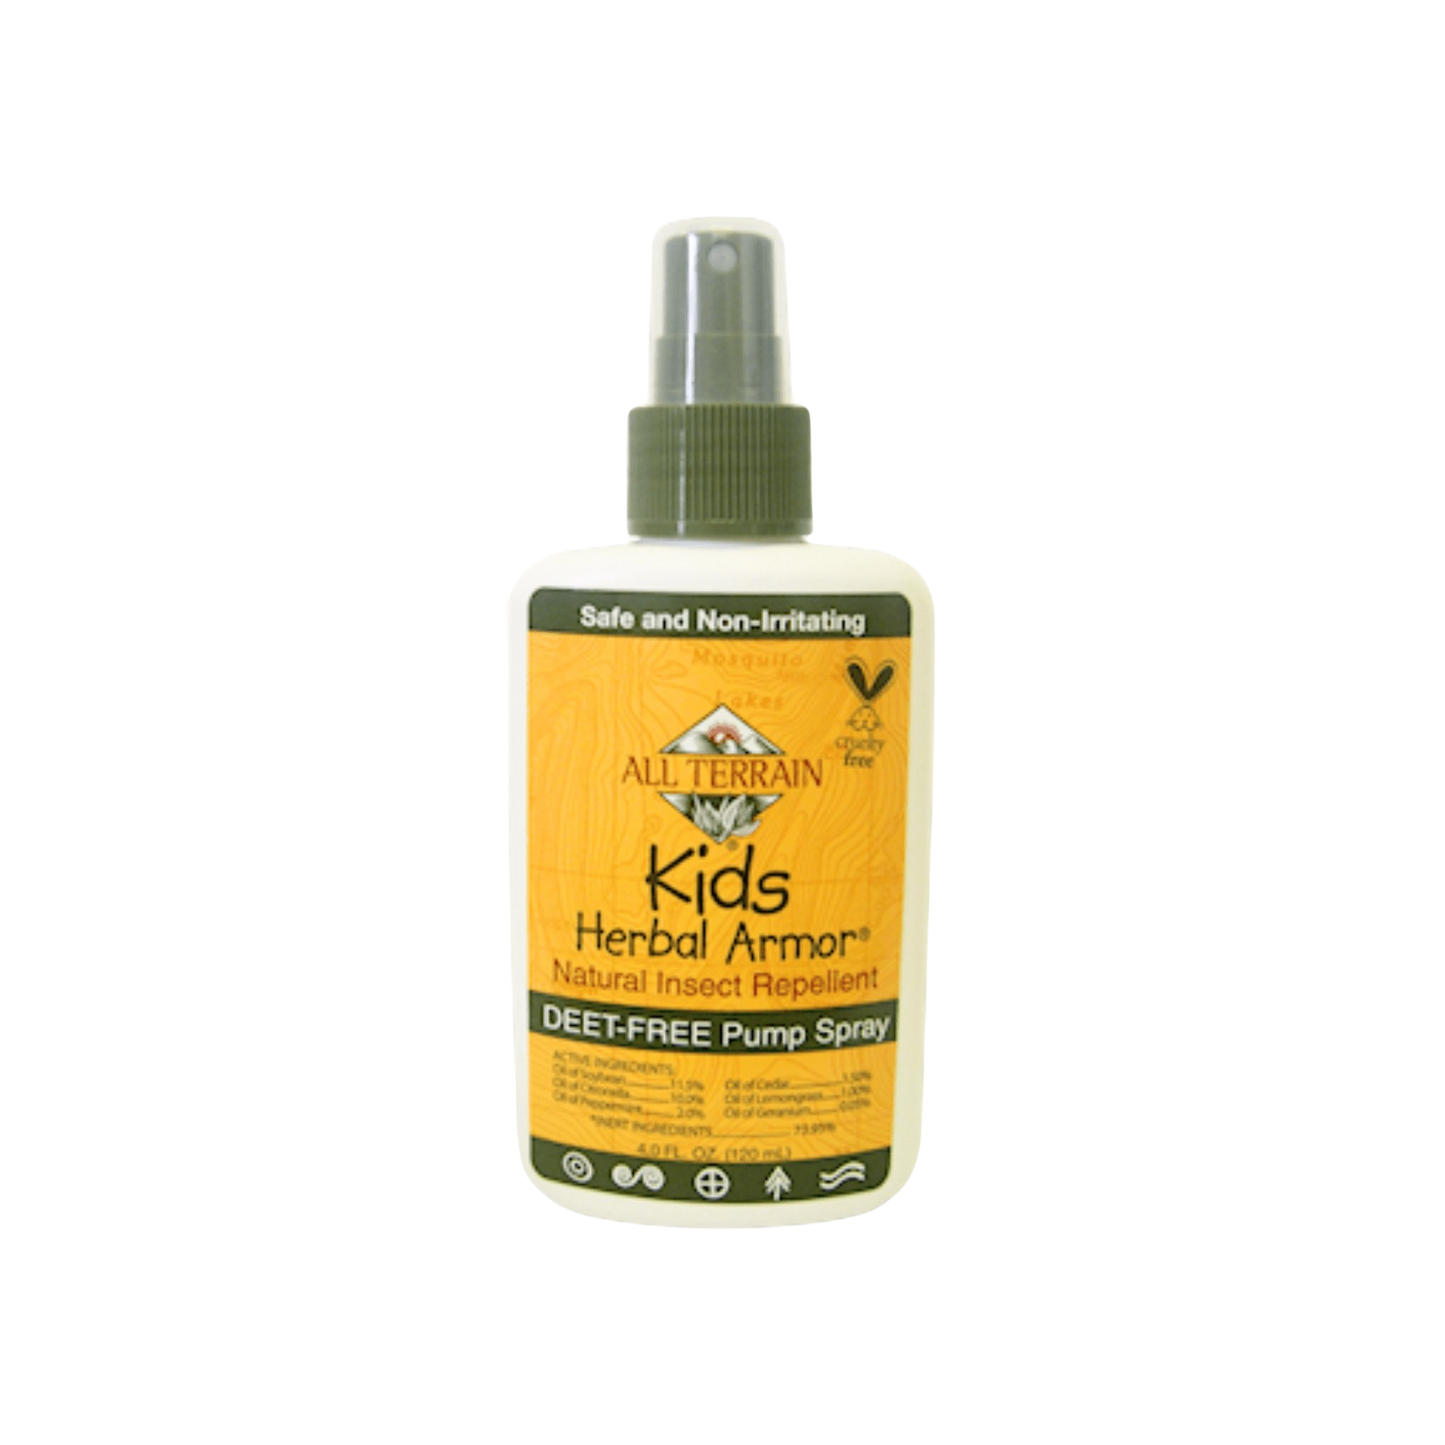 All Terrain Kids Herbal Armor Insect Repellent Spray